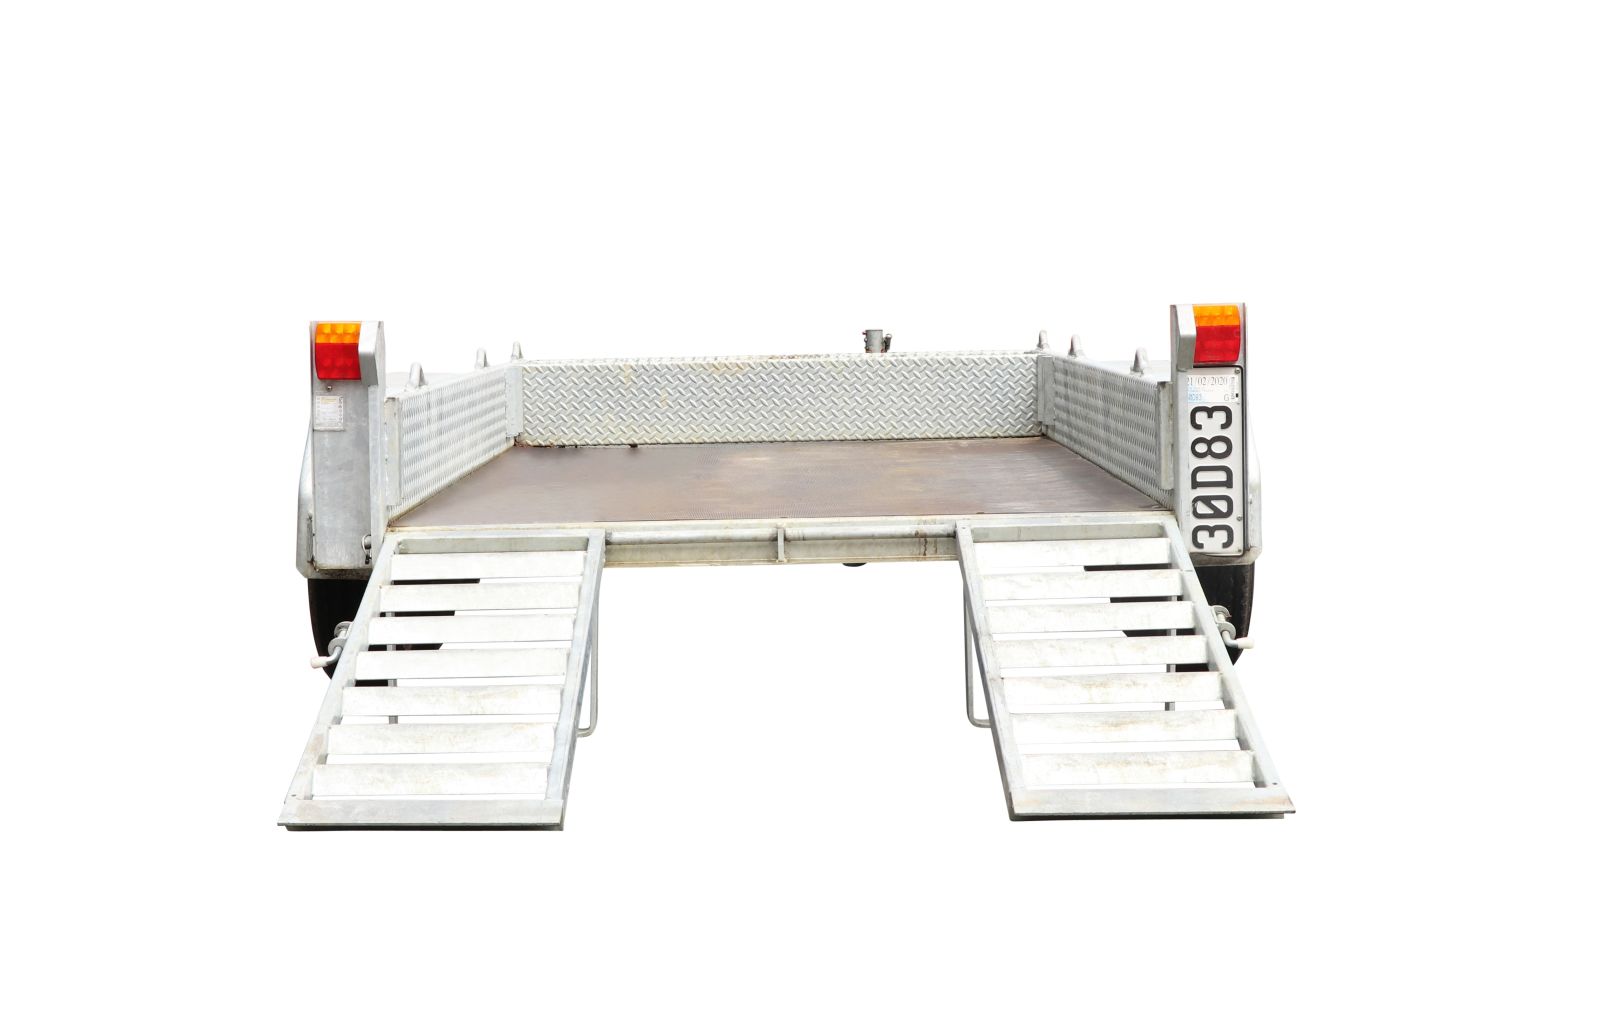 614B Trailer for Equipment Tandem Axle up to 1.8 Tonne